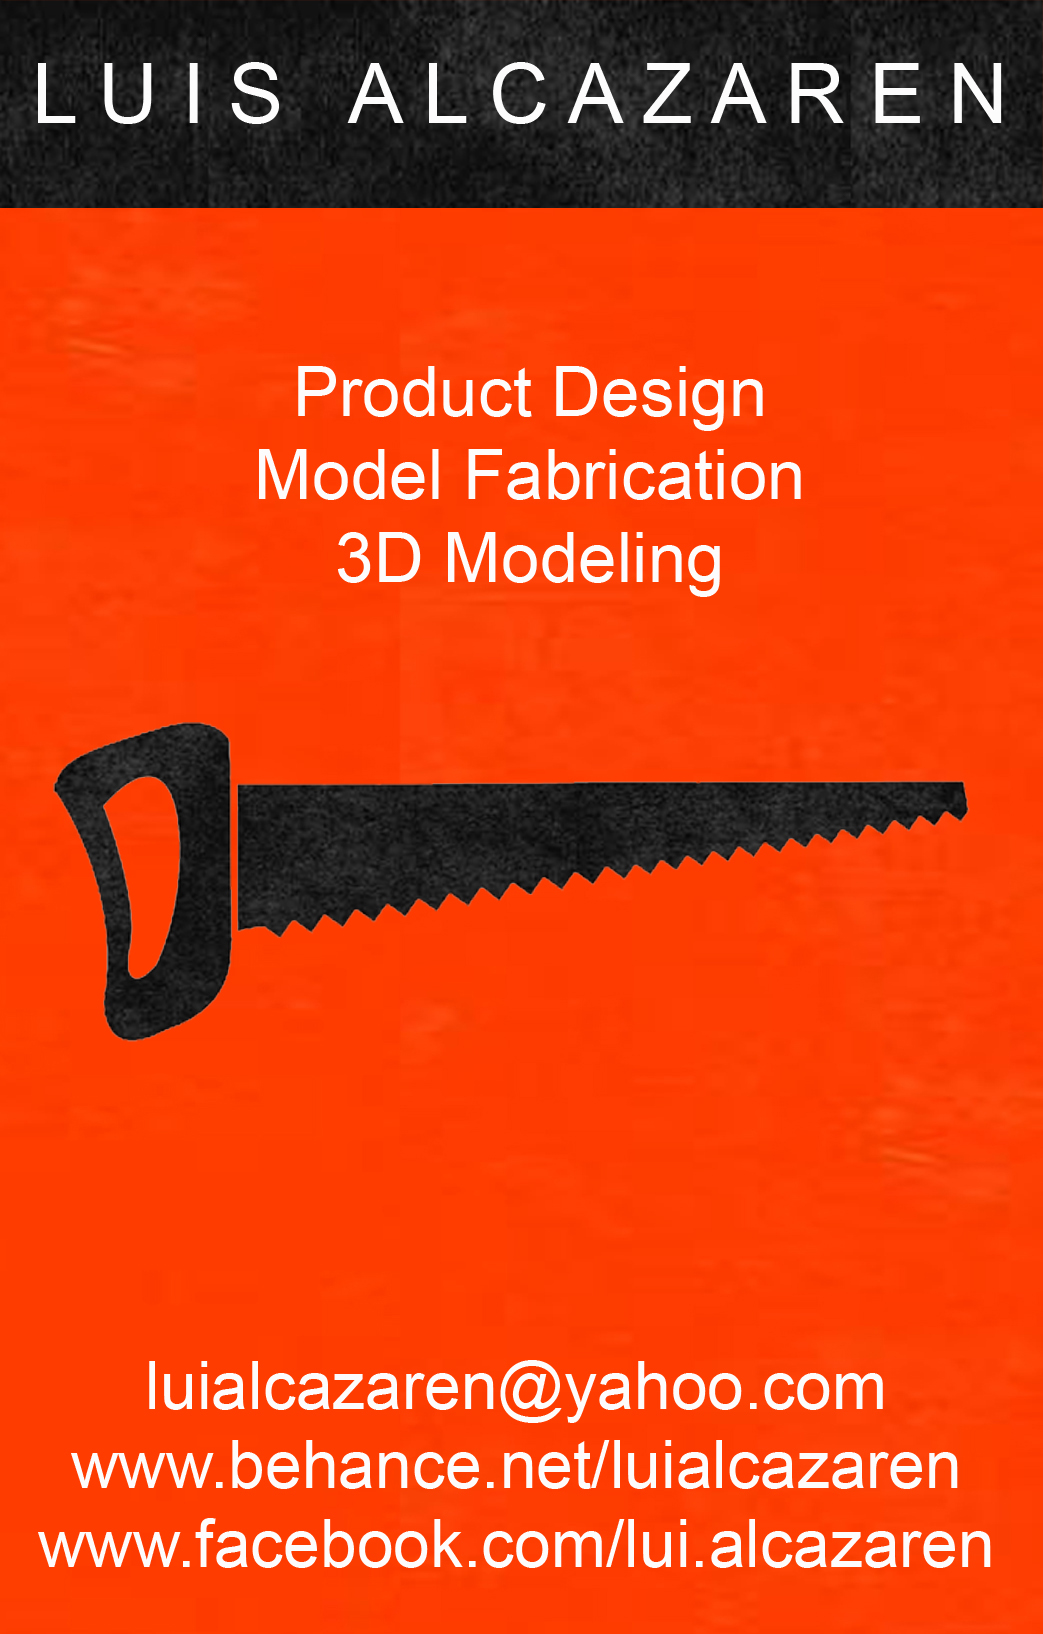 fabrication 3d modeling longboards and cruisers